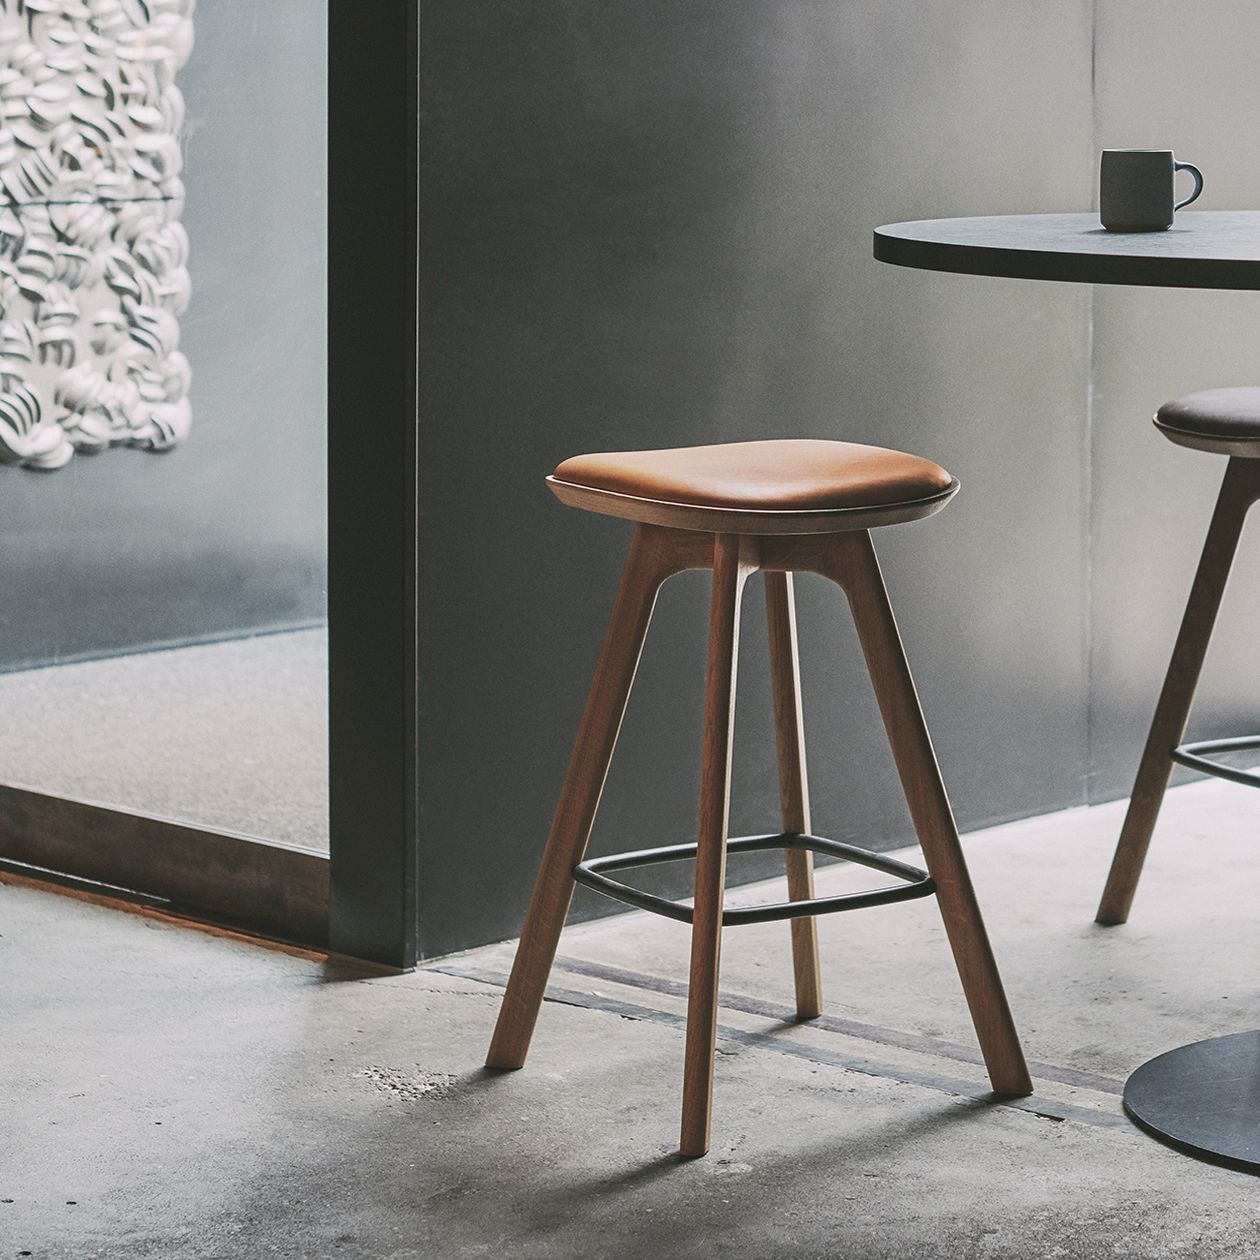 Wooden bar stool crafted with a brown leather seat